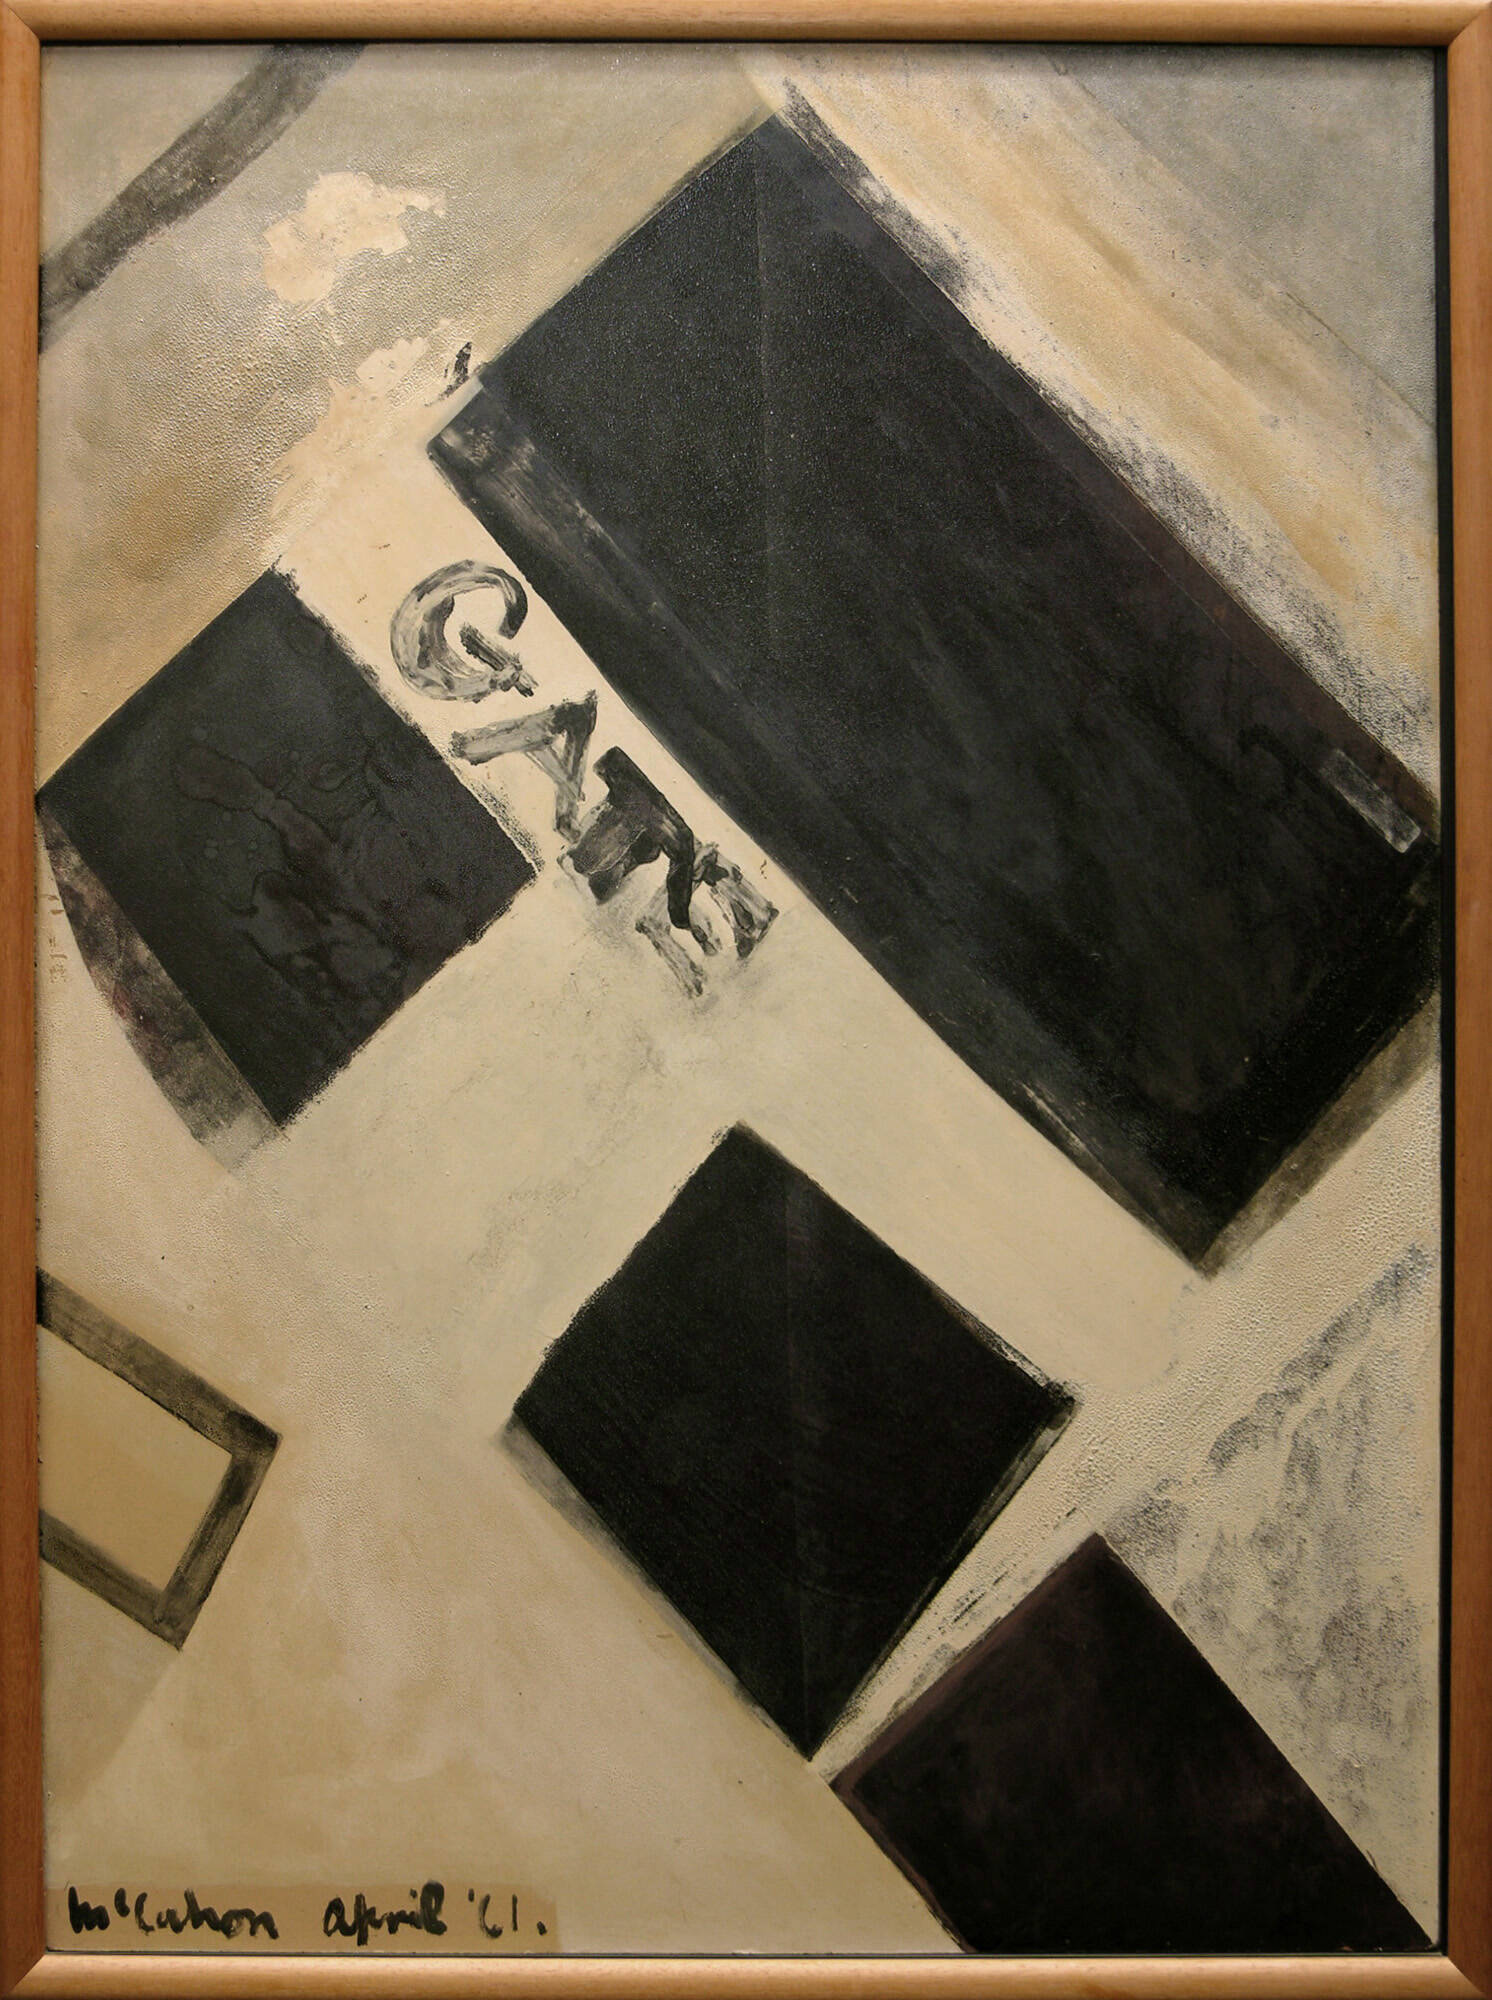 <p>Colin McCahon, <i>Gate 10</i>, 1961, enamel on board,&nbsp;<span style="color: rgb(0, 0, 0); font-family: Theinhardt, Arial, sans-serif; font-size: 16px;">Auckland Art Gallery Toi o Tāmaki, gift of an anonymous donor, 1985</span></p>
